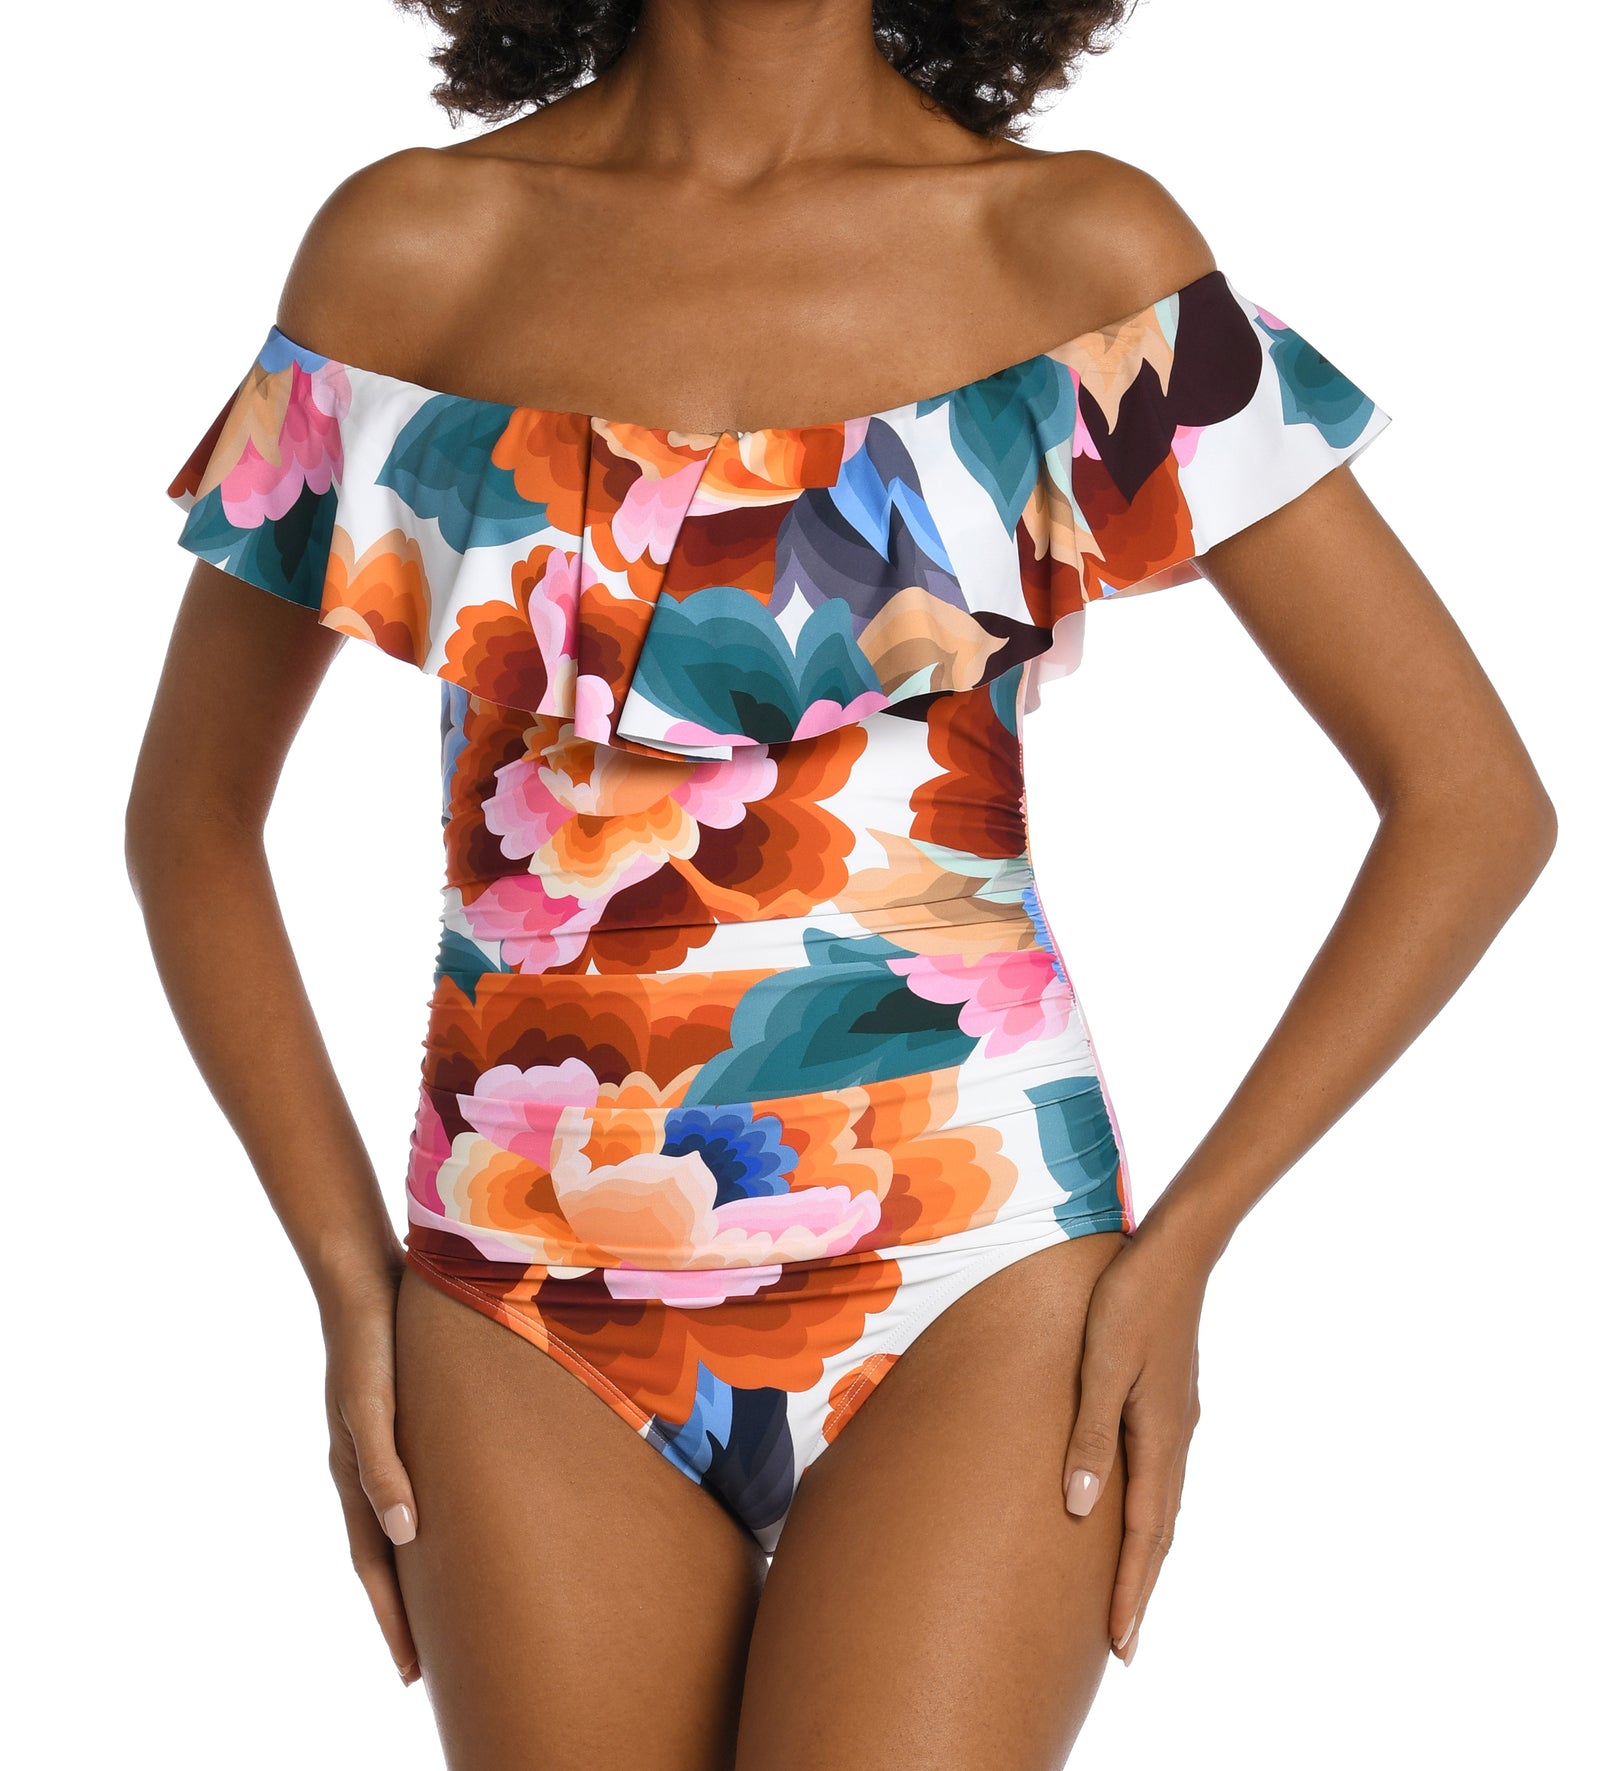 Floral Rhythm Collection   Off the Shoulder Ruffle Mio  Moderate Rear Coverage   Fabric Content: 83% Nylon / 17% Elastane   Product#: LB3VE11